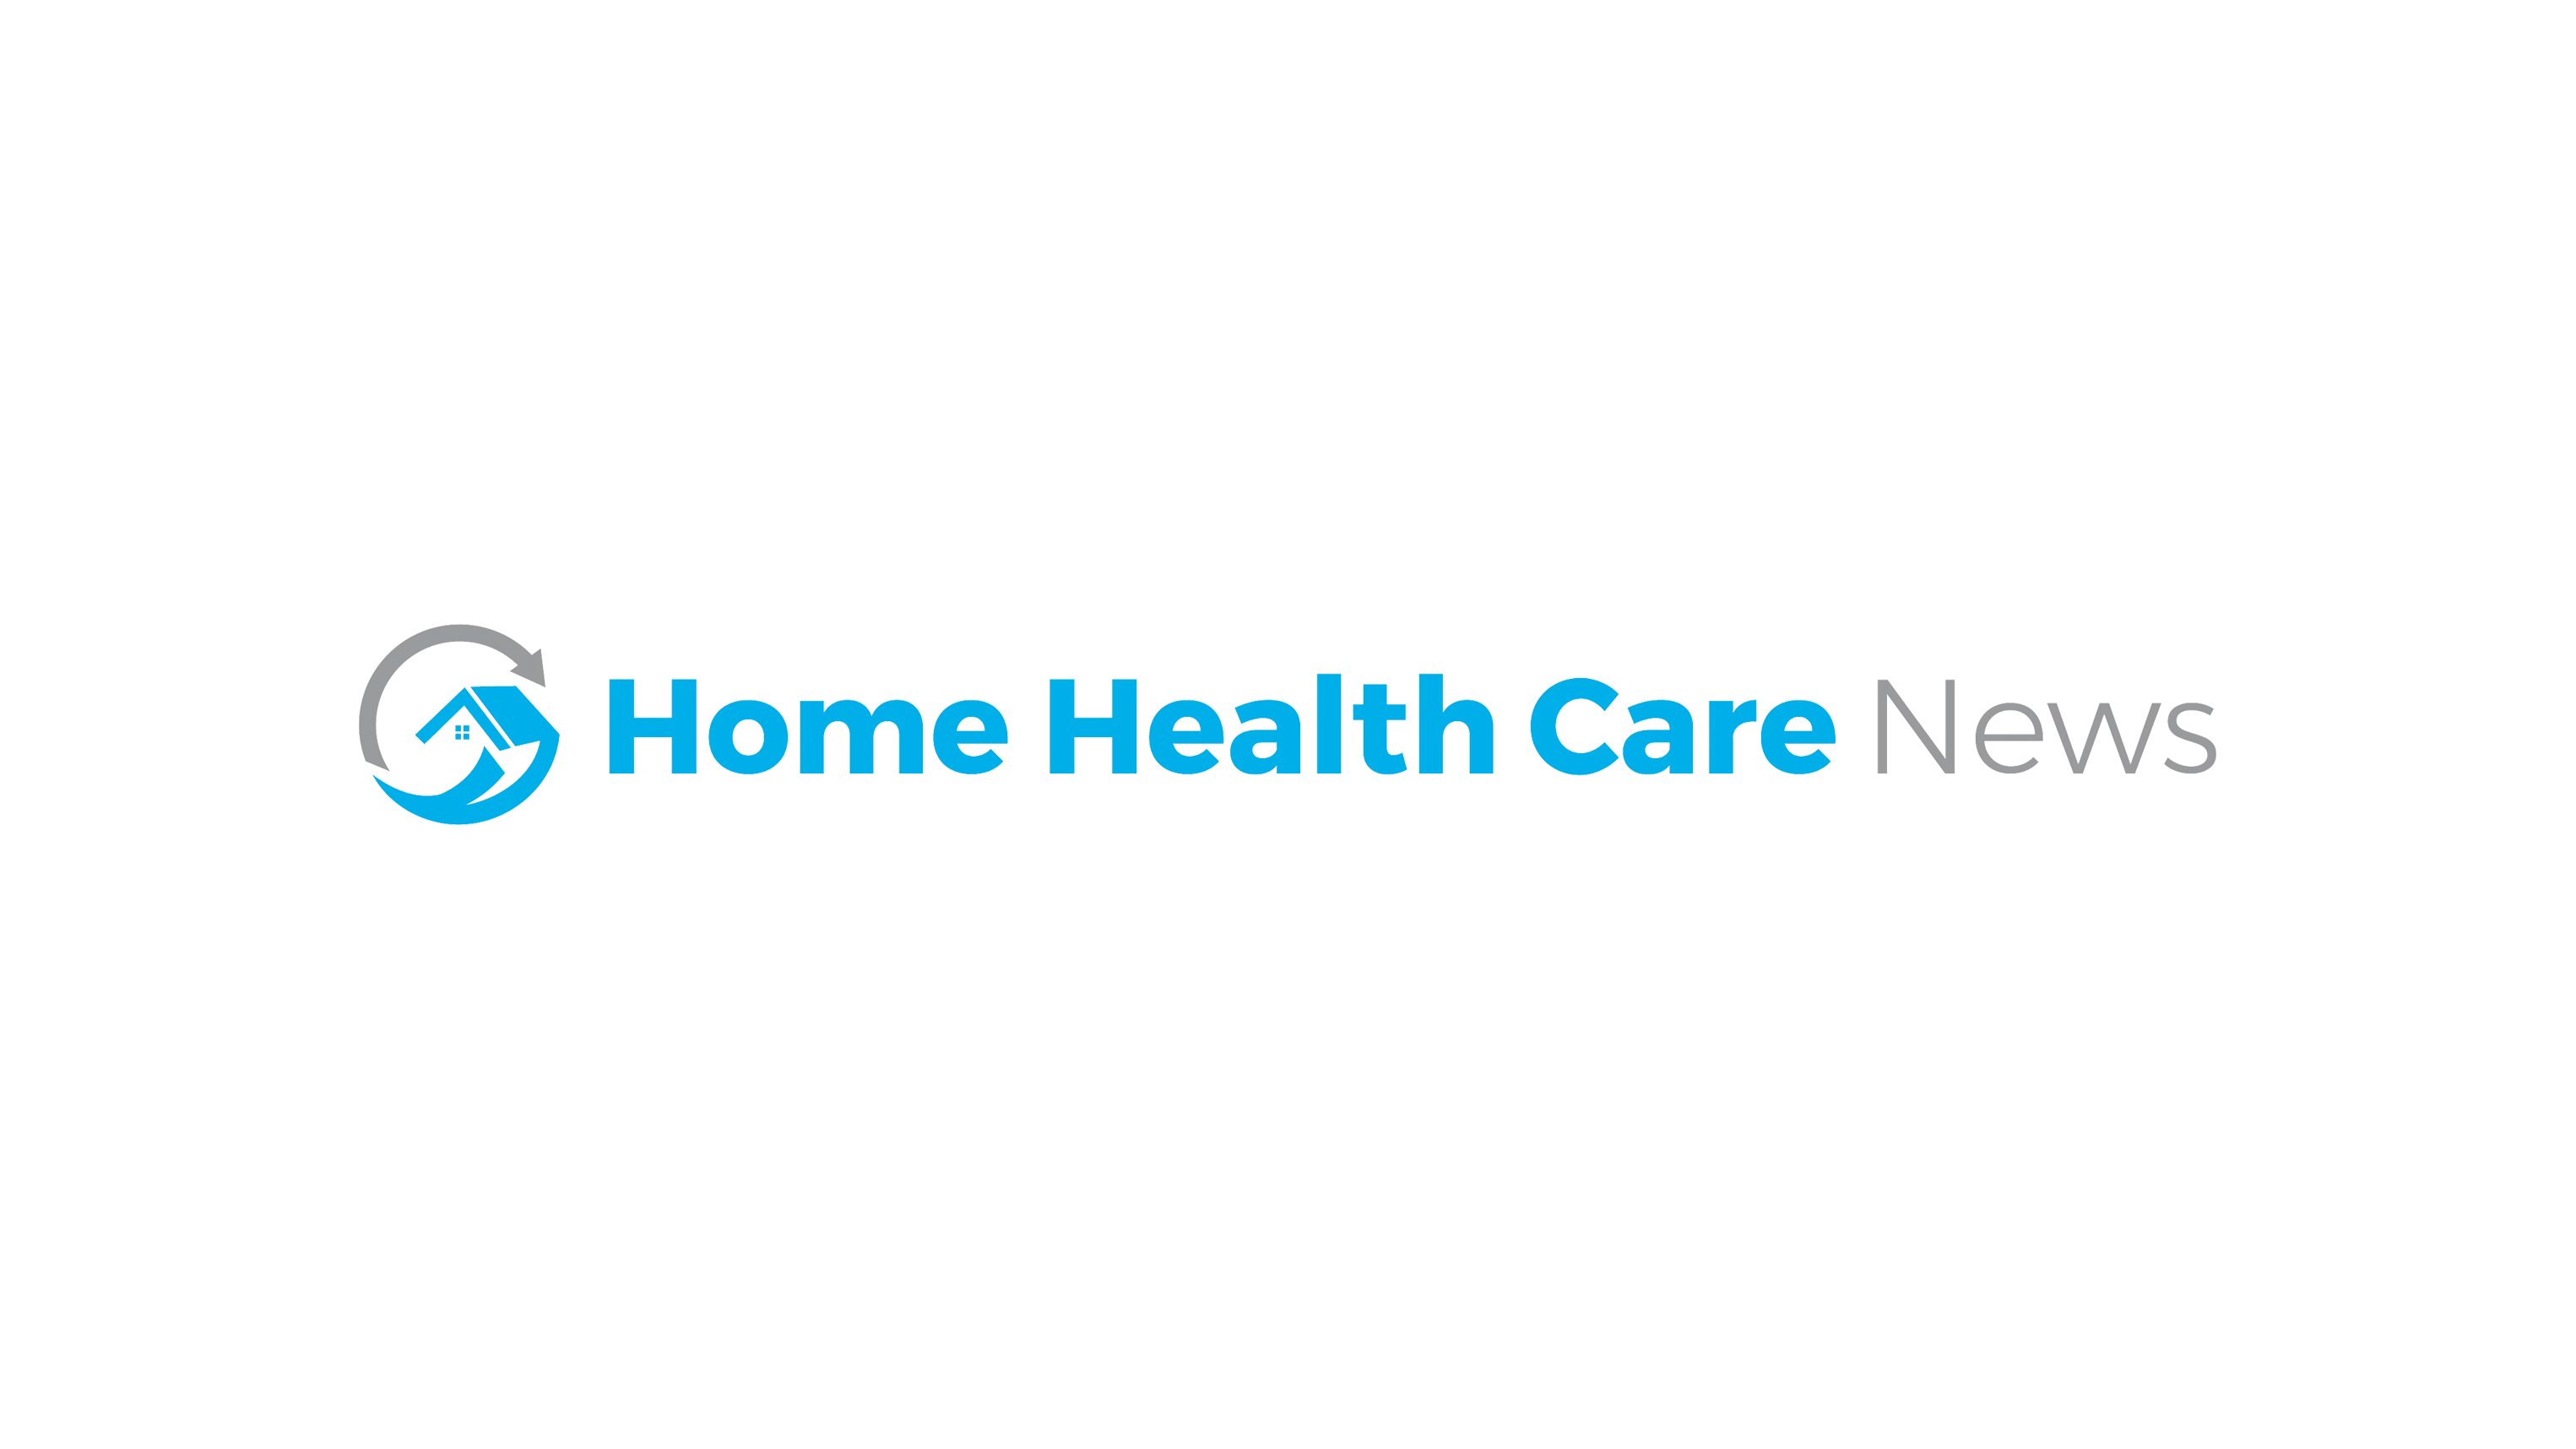 Home Health Care News Coverage for Wider Circle